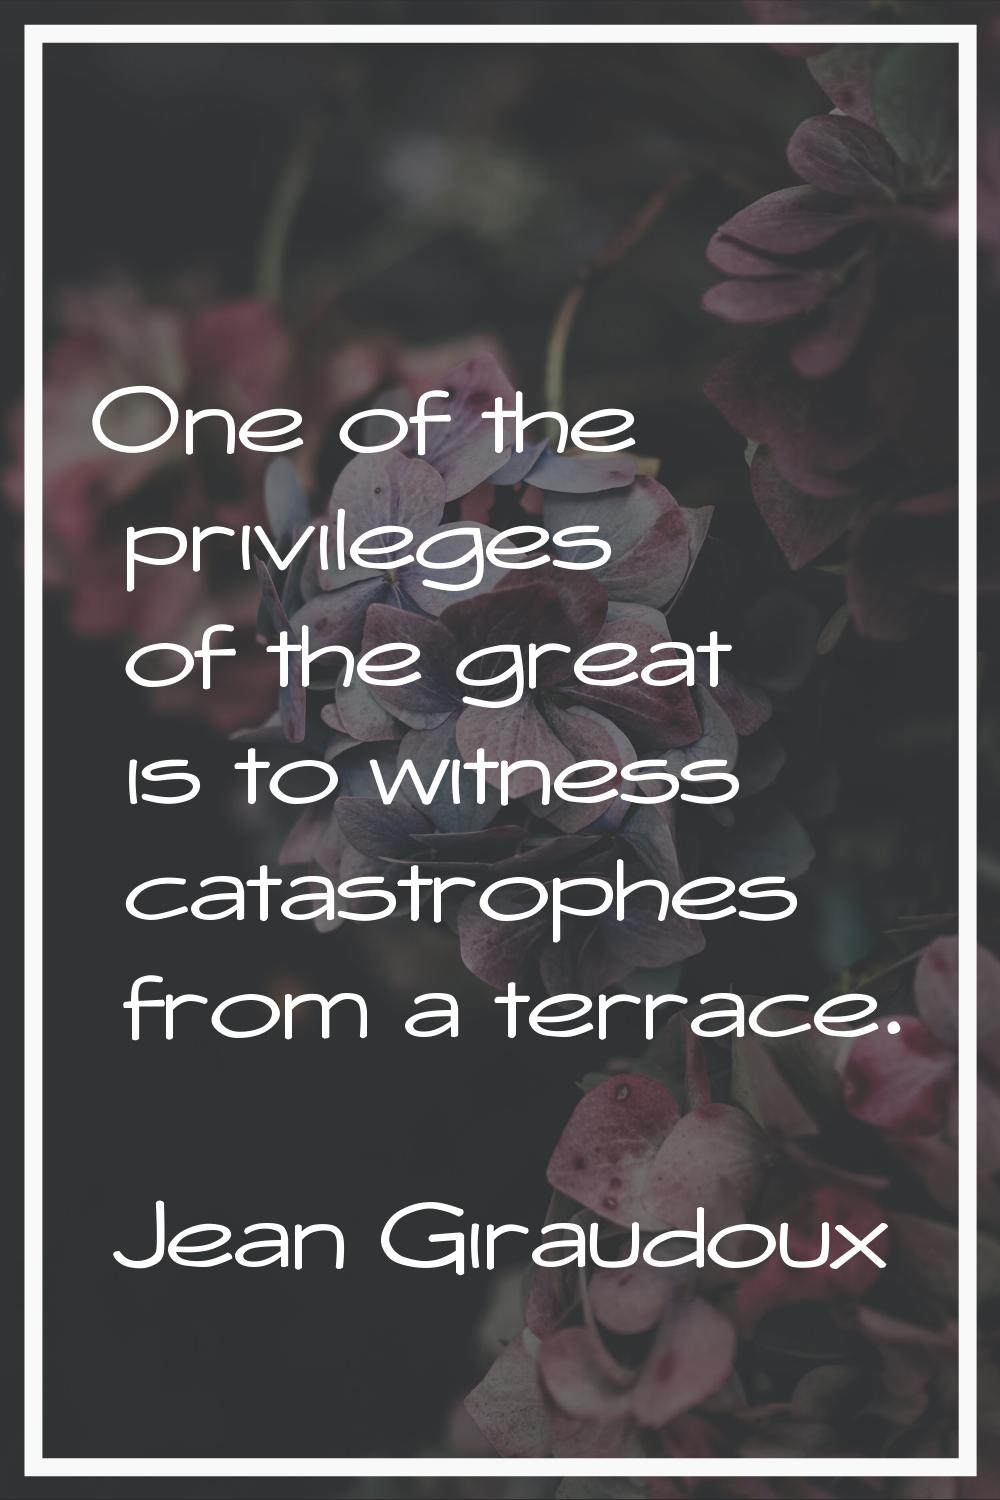 One of the privileges of the great is to witness catastrophes from a terrace.